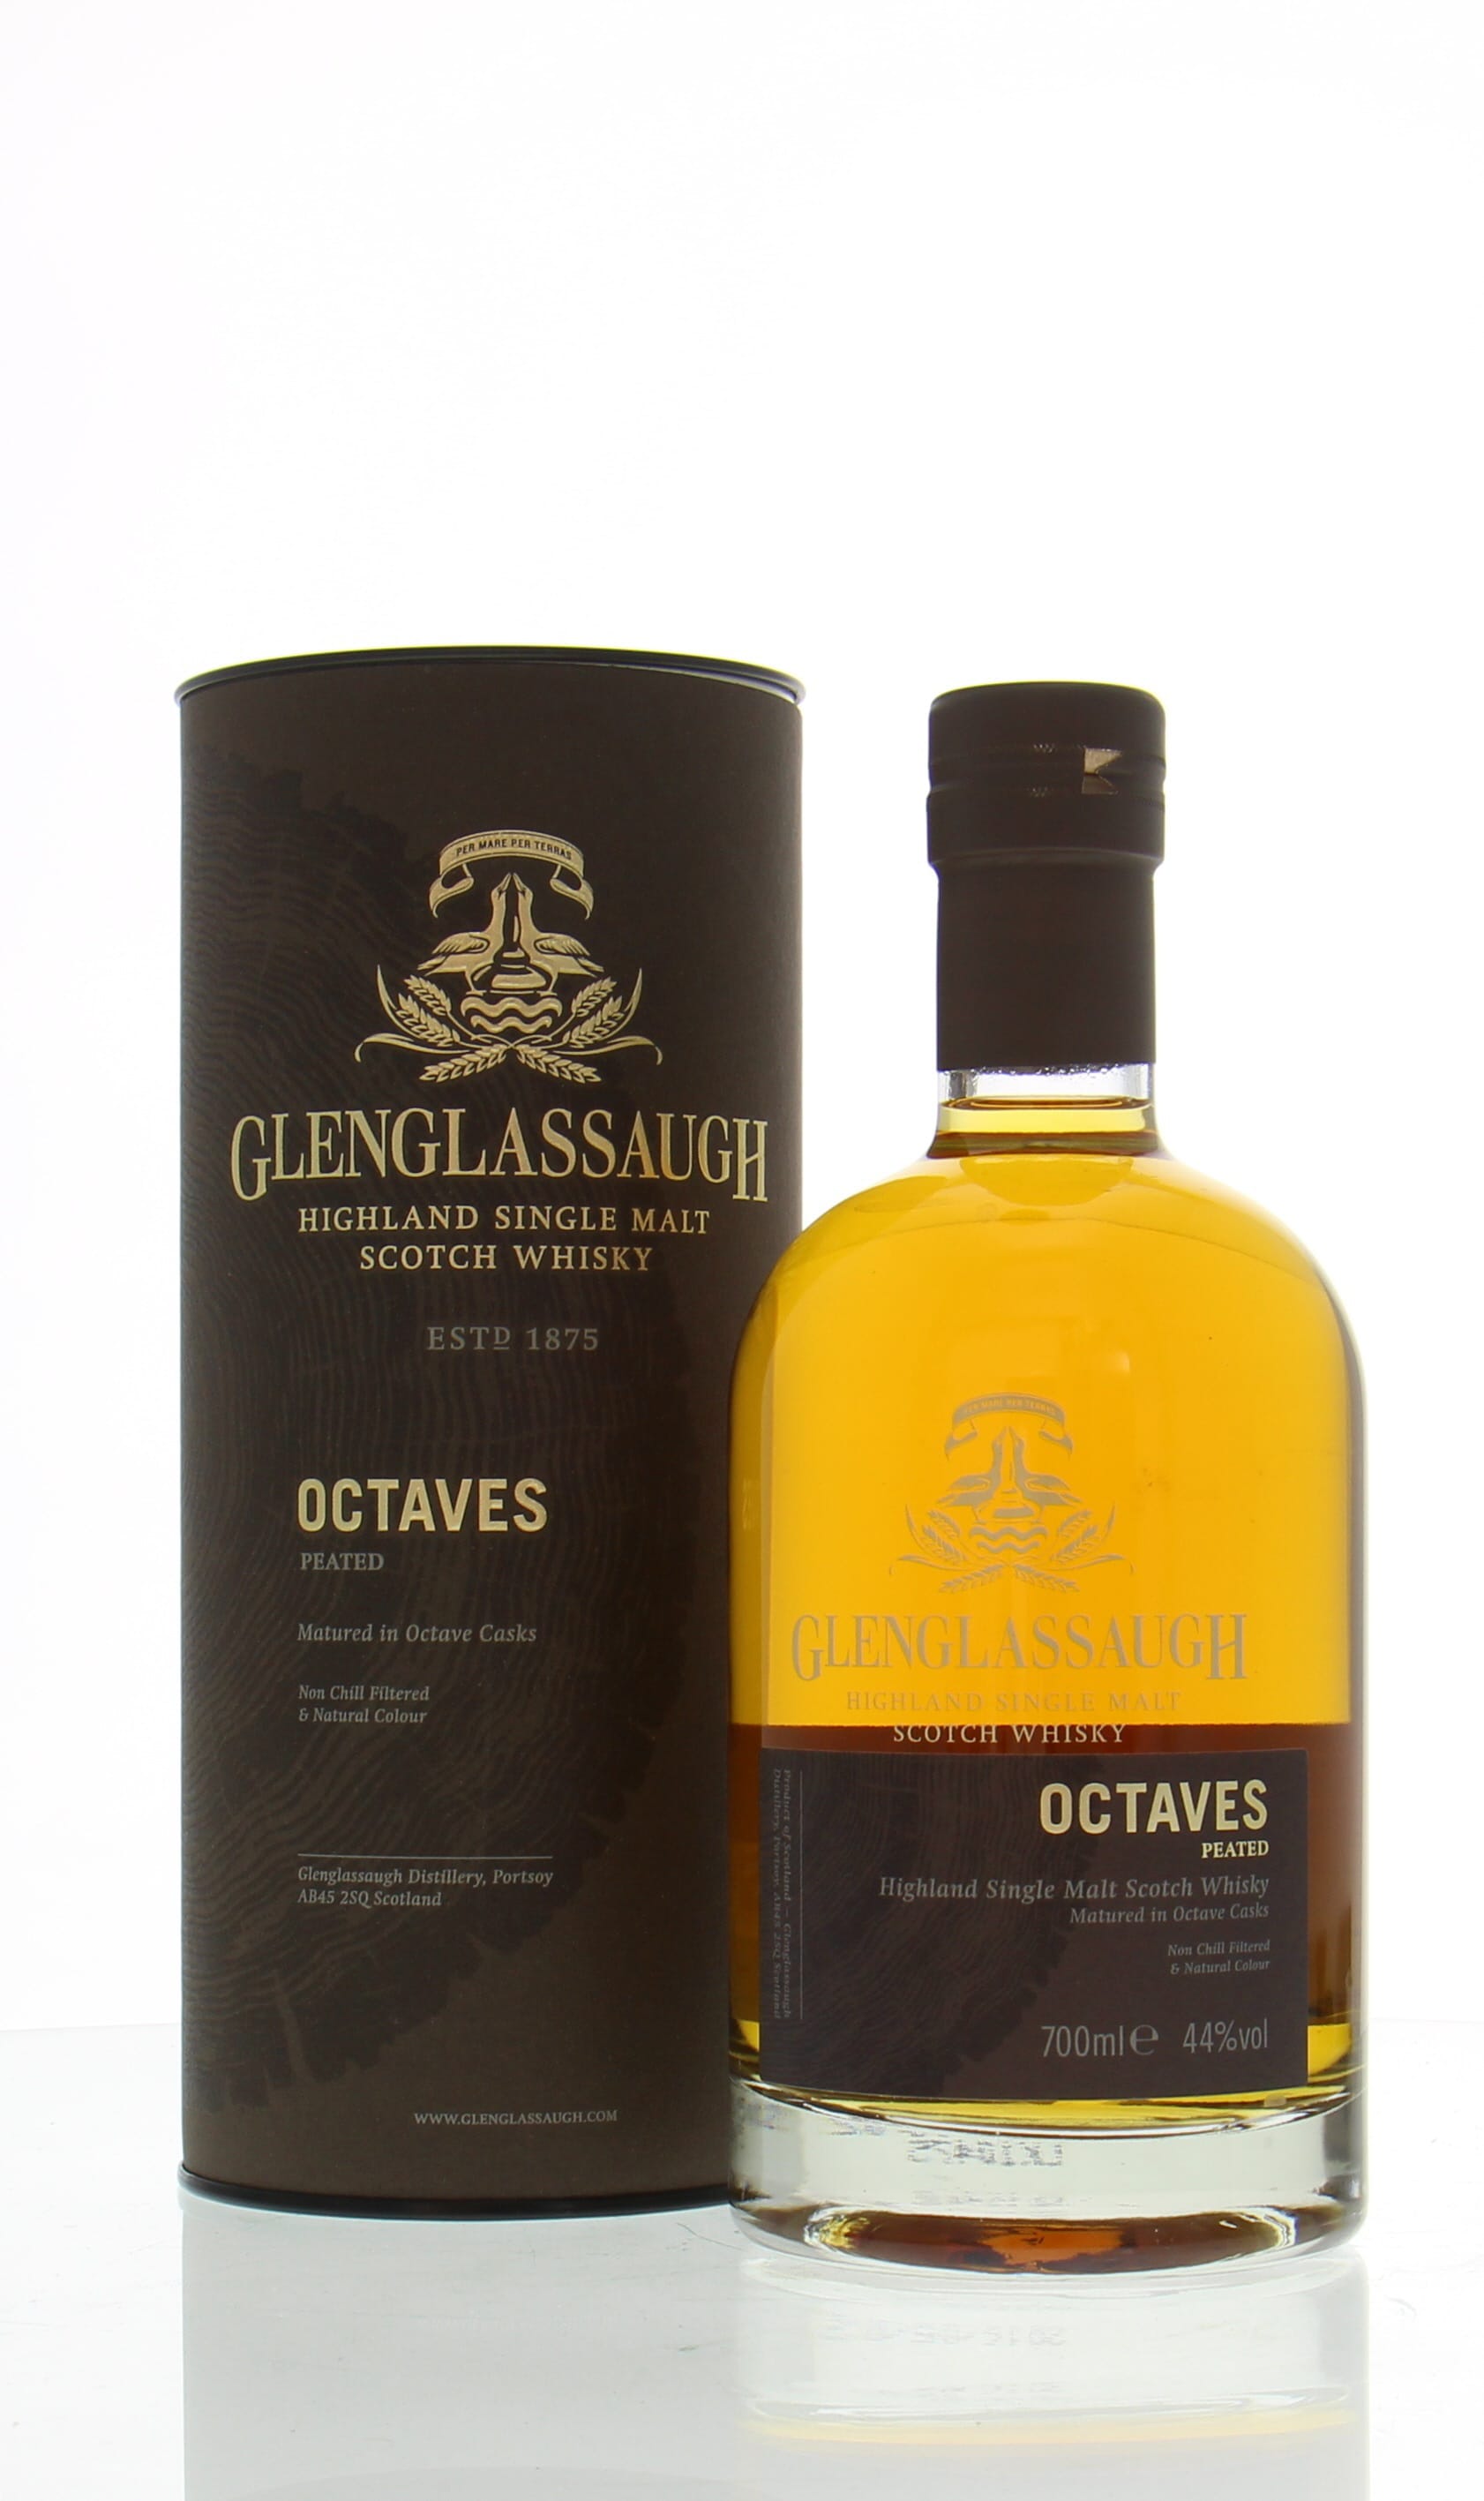 Glenglassaugh - Octaves Peated 44% NV In Original Container